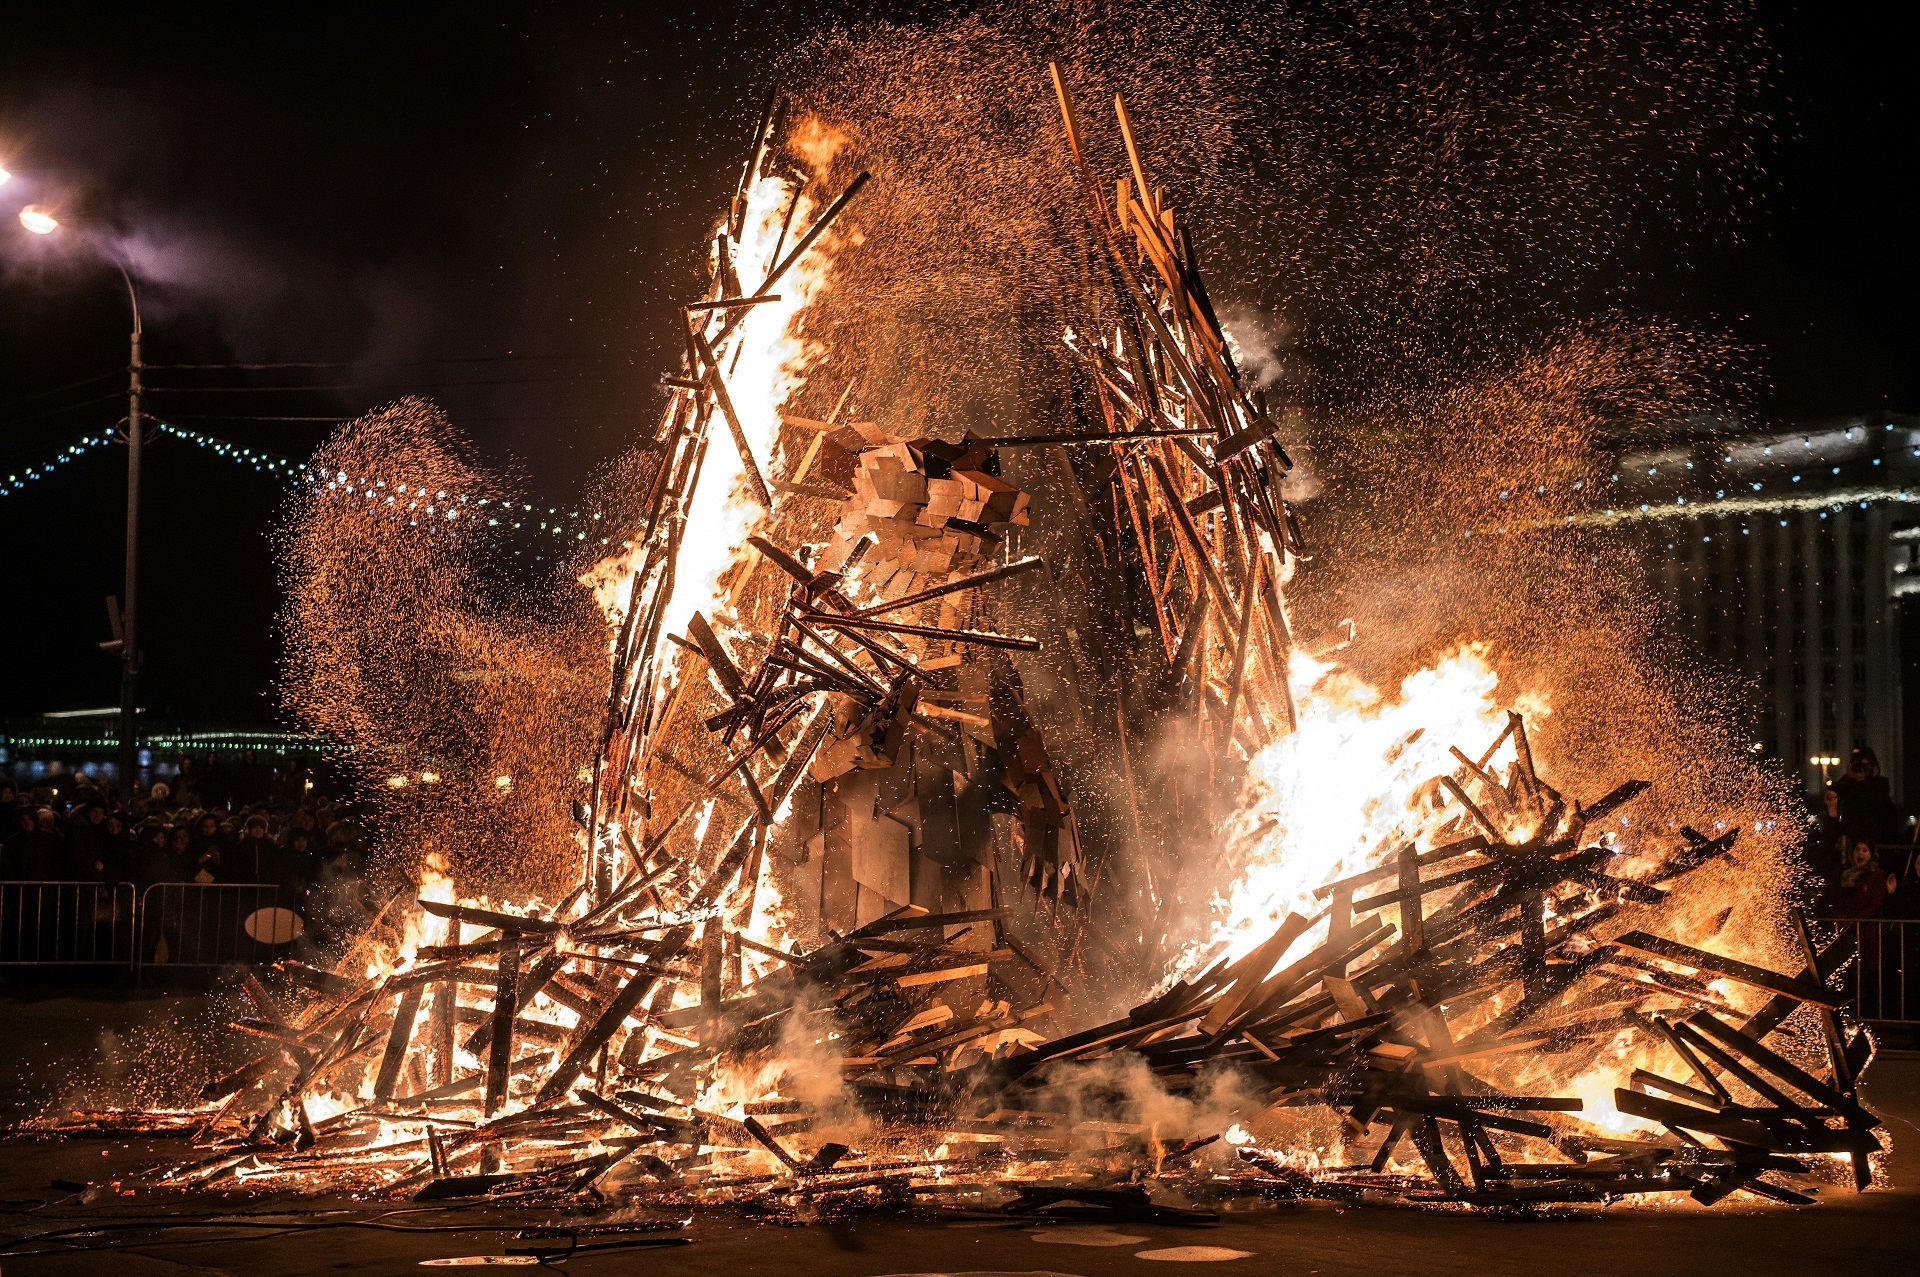 People watch a berloga («the lair») dummy with 3,5-meter steel bear inside burning down during celebrations of Maslenitsa (Shrovetide), a farewell ceremony to winter in Moscow's Gorky Park on March 13, 2016. Hungarian artist Gabor Miklos Szoke made a bear as the symbol of spring, and in march its time to wake him up and get him out of the lair. The art installation consists of two parts: the lair, which will be burnt together with winter and the bear, which will stay at the Park with spring. / AFP PHOTO / DMITRY SEREBRYAKOV